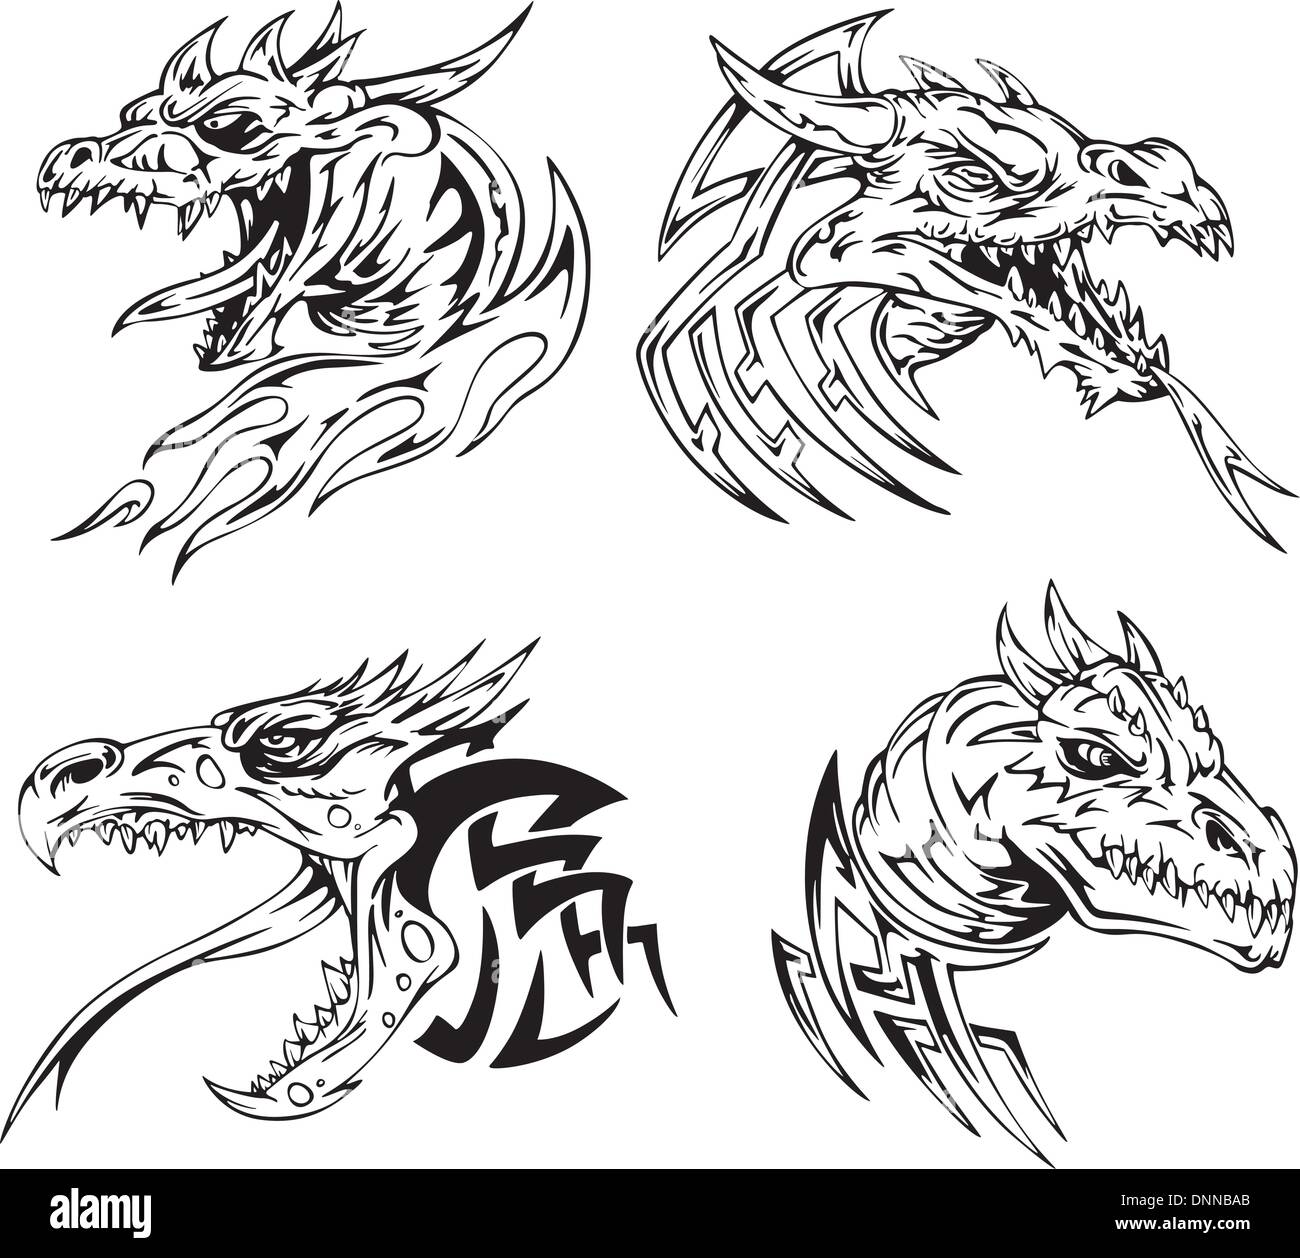 2300 Red Dragon Tattoo Stock Photos Pictures  RoyaltyFree Images   iStock